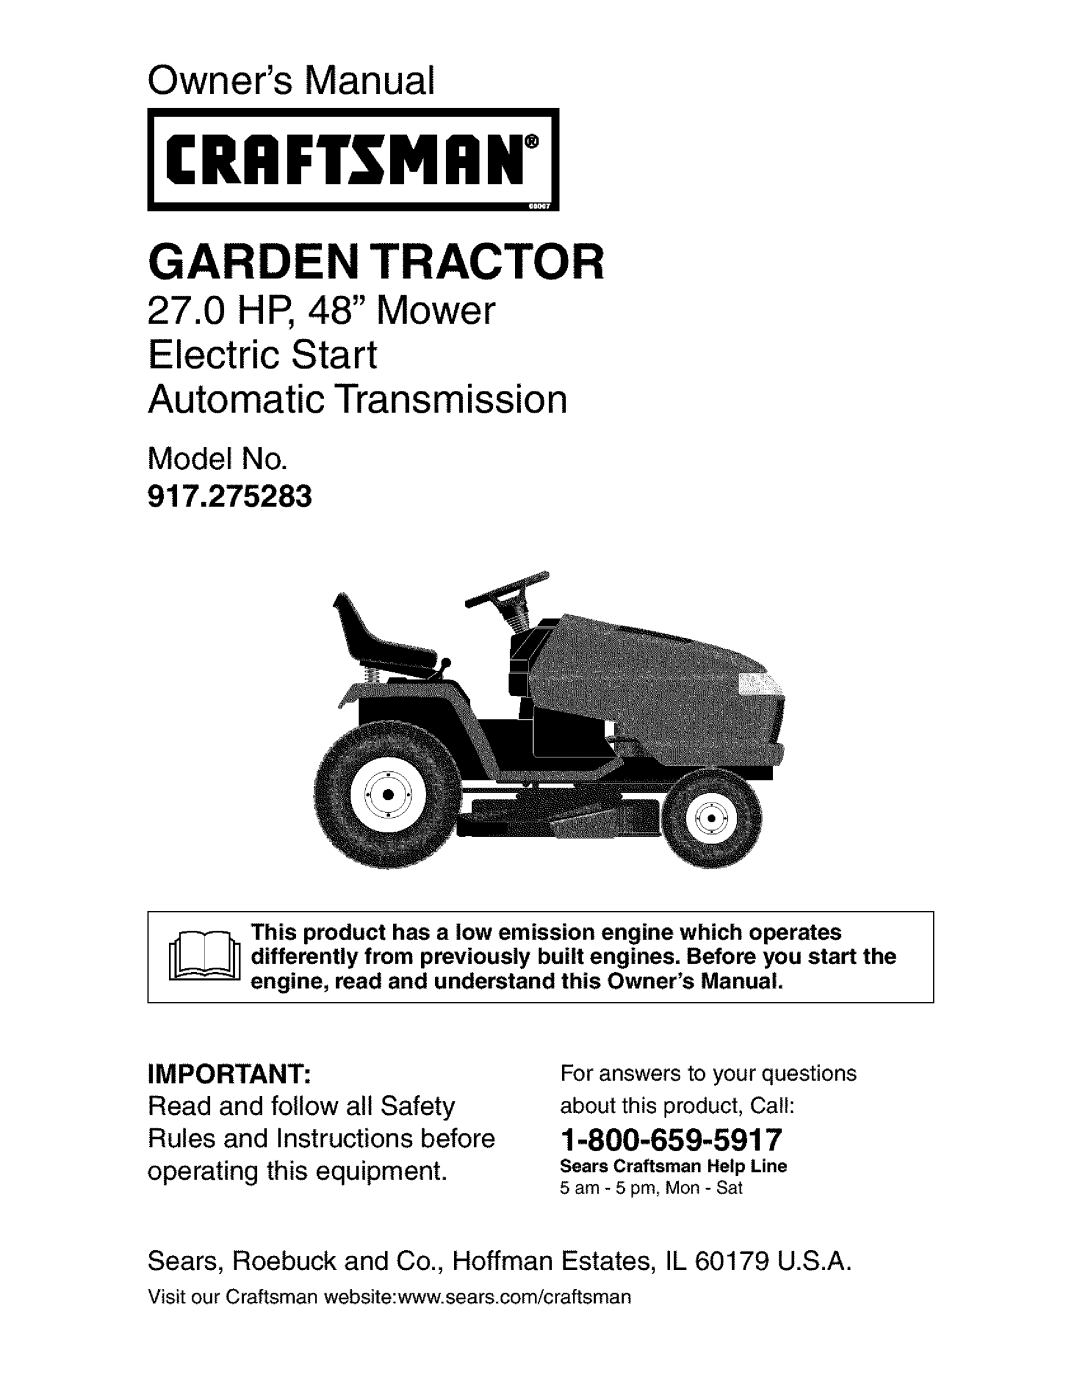 Craftsman 917.275283 owner manual 27.0HP, 48 Mower Electric Start, Read, and follow, all Safety, Rules, Sears, Roebuck 